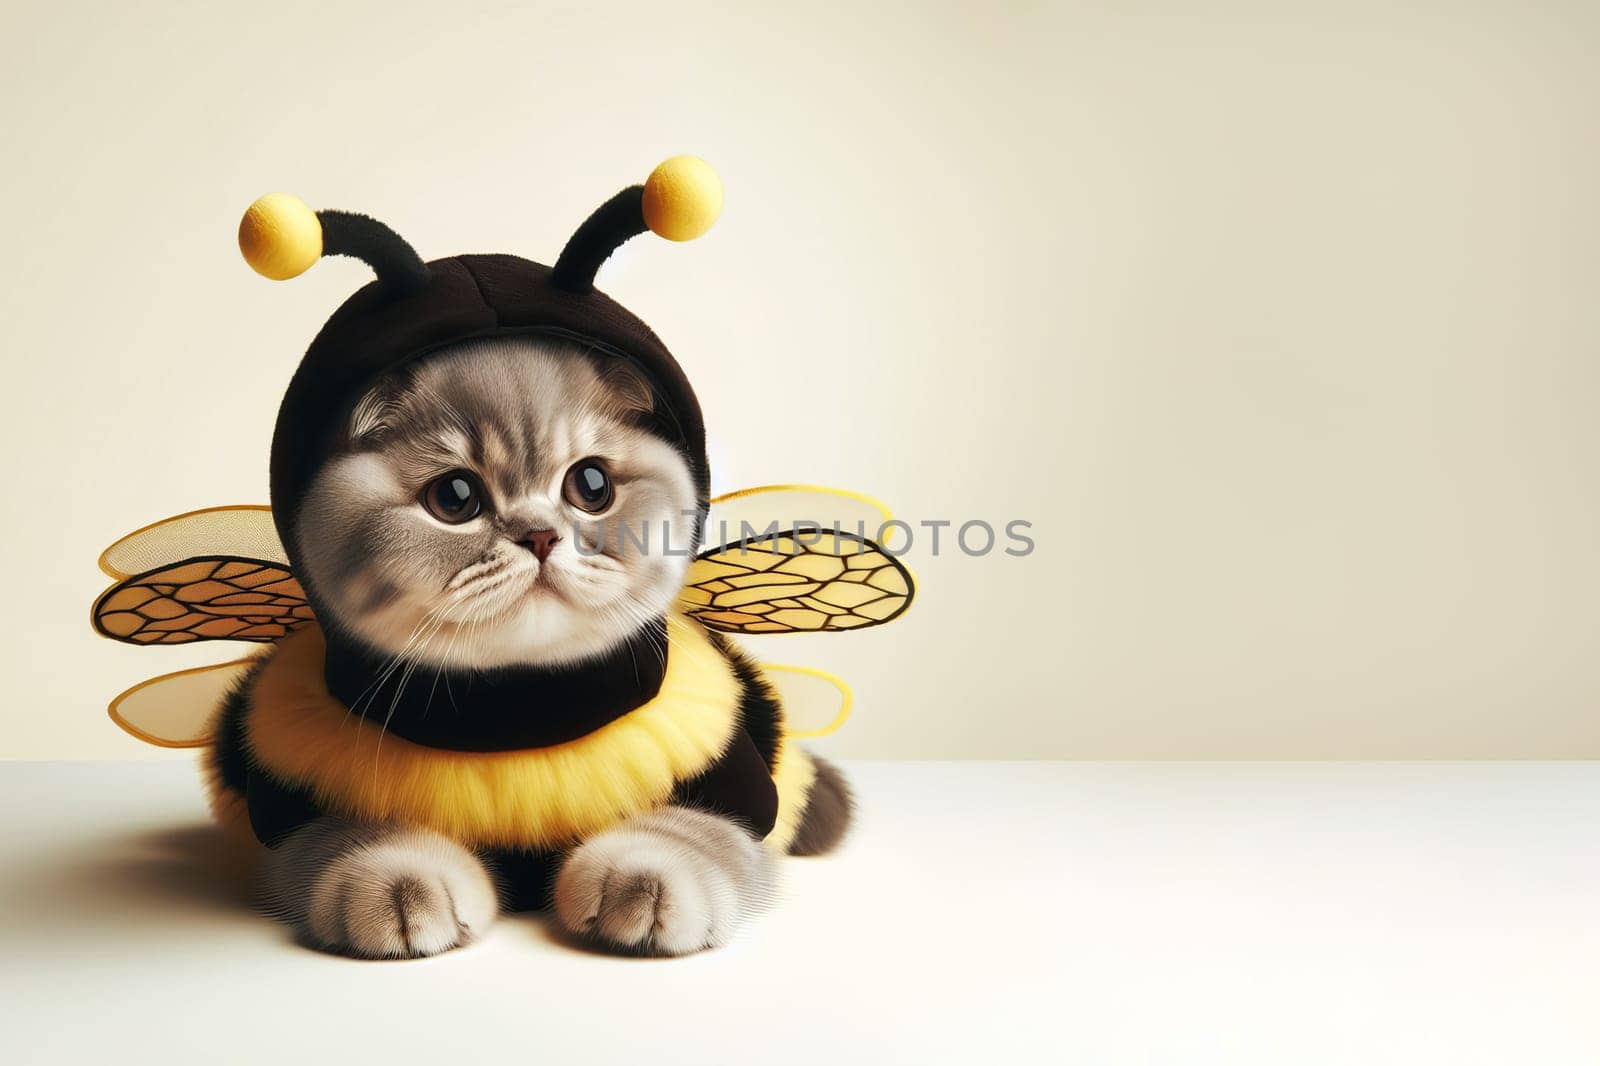 Cute gray cat of the British breed dressed in a bee costume, light background. Bee day or halloween concept.